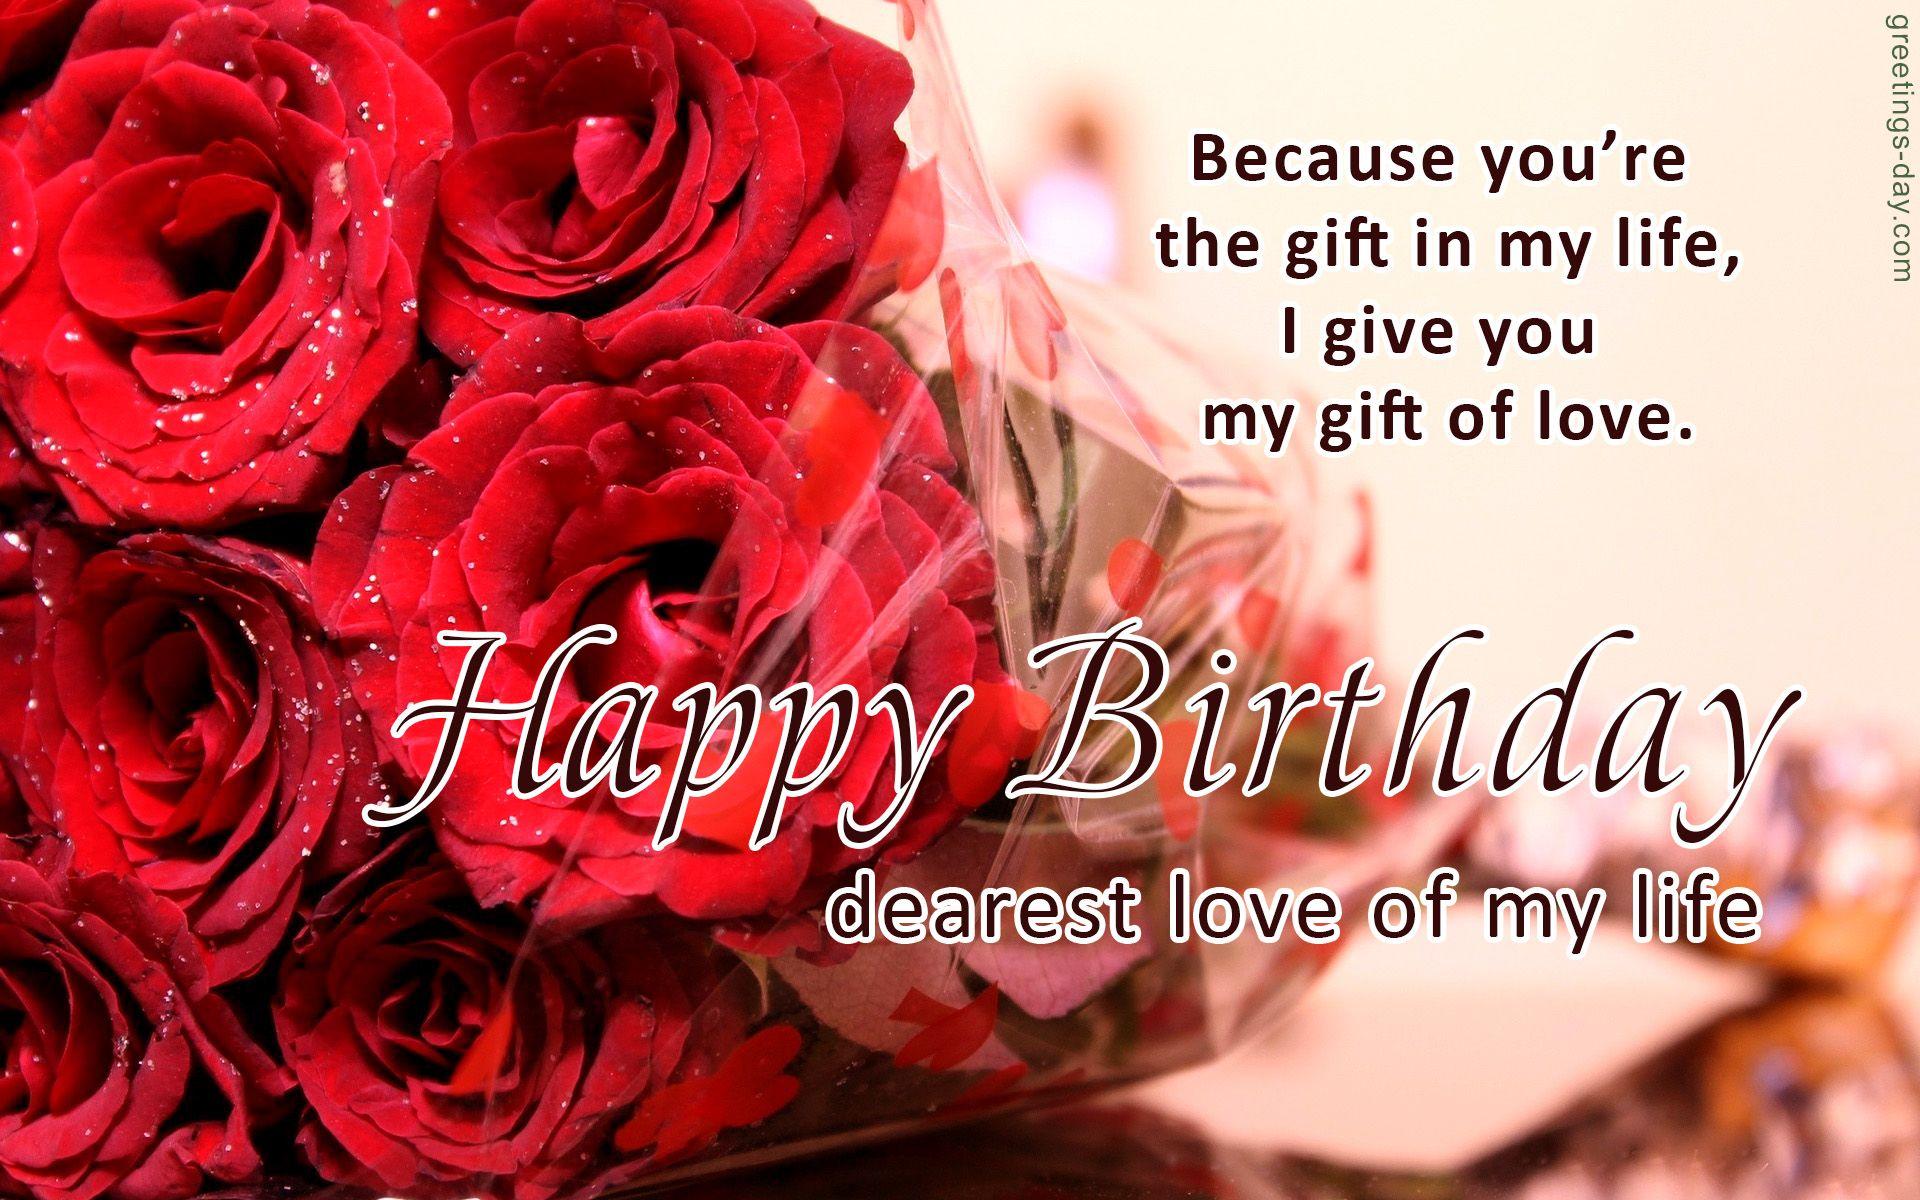 Sweet Birthday Wishes and Greetings for Loved One